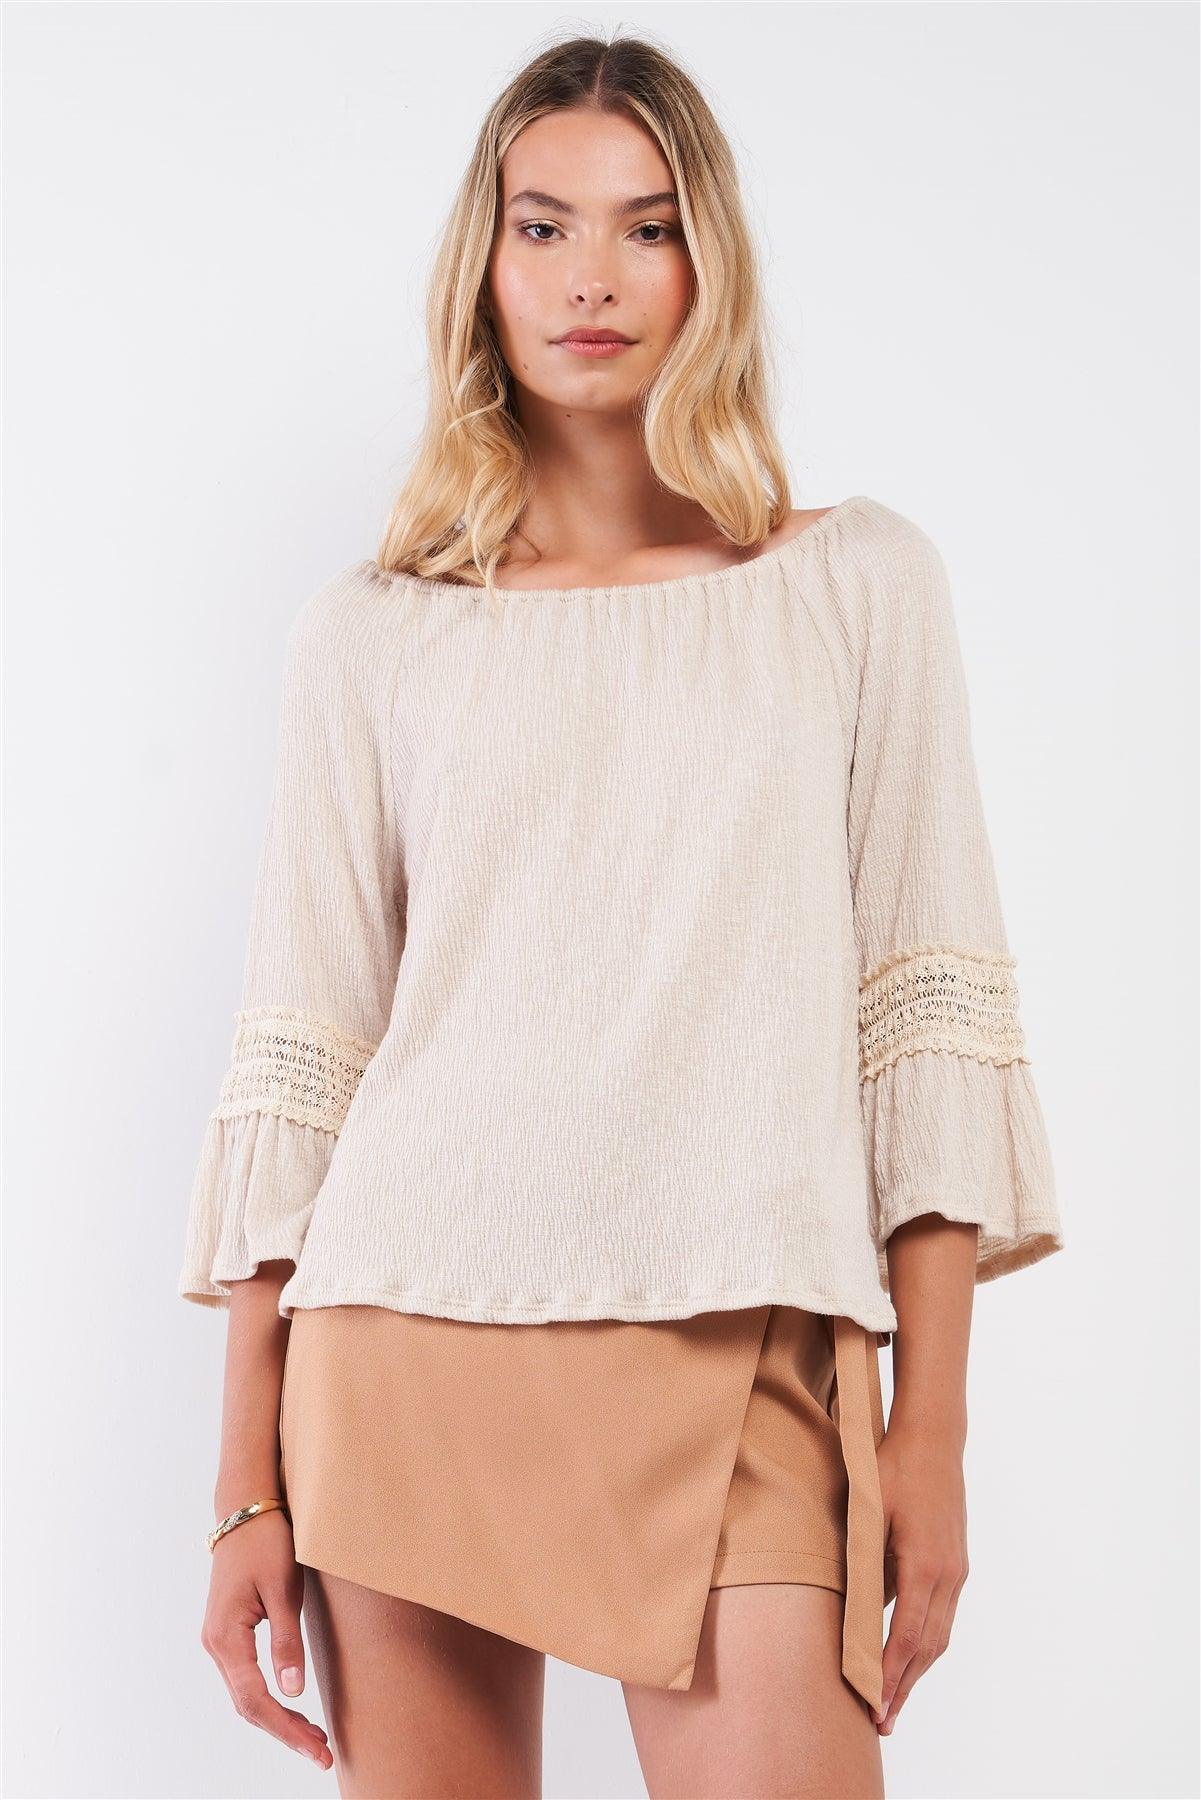 Natural Beige Boat Neck 3/4 Flare Sleeve With Embroidery Detail Top /2-2-2